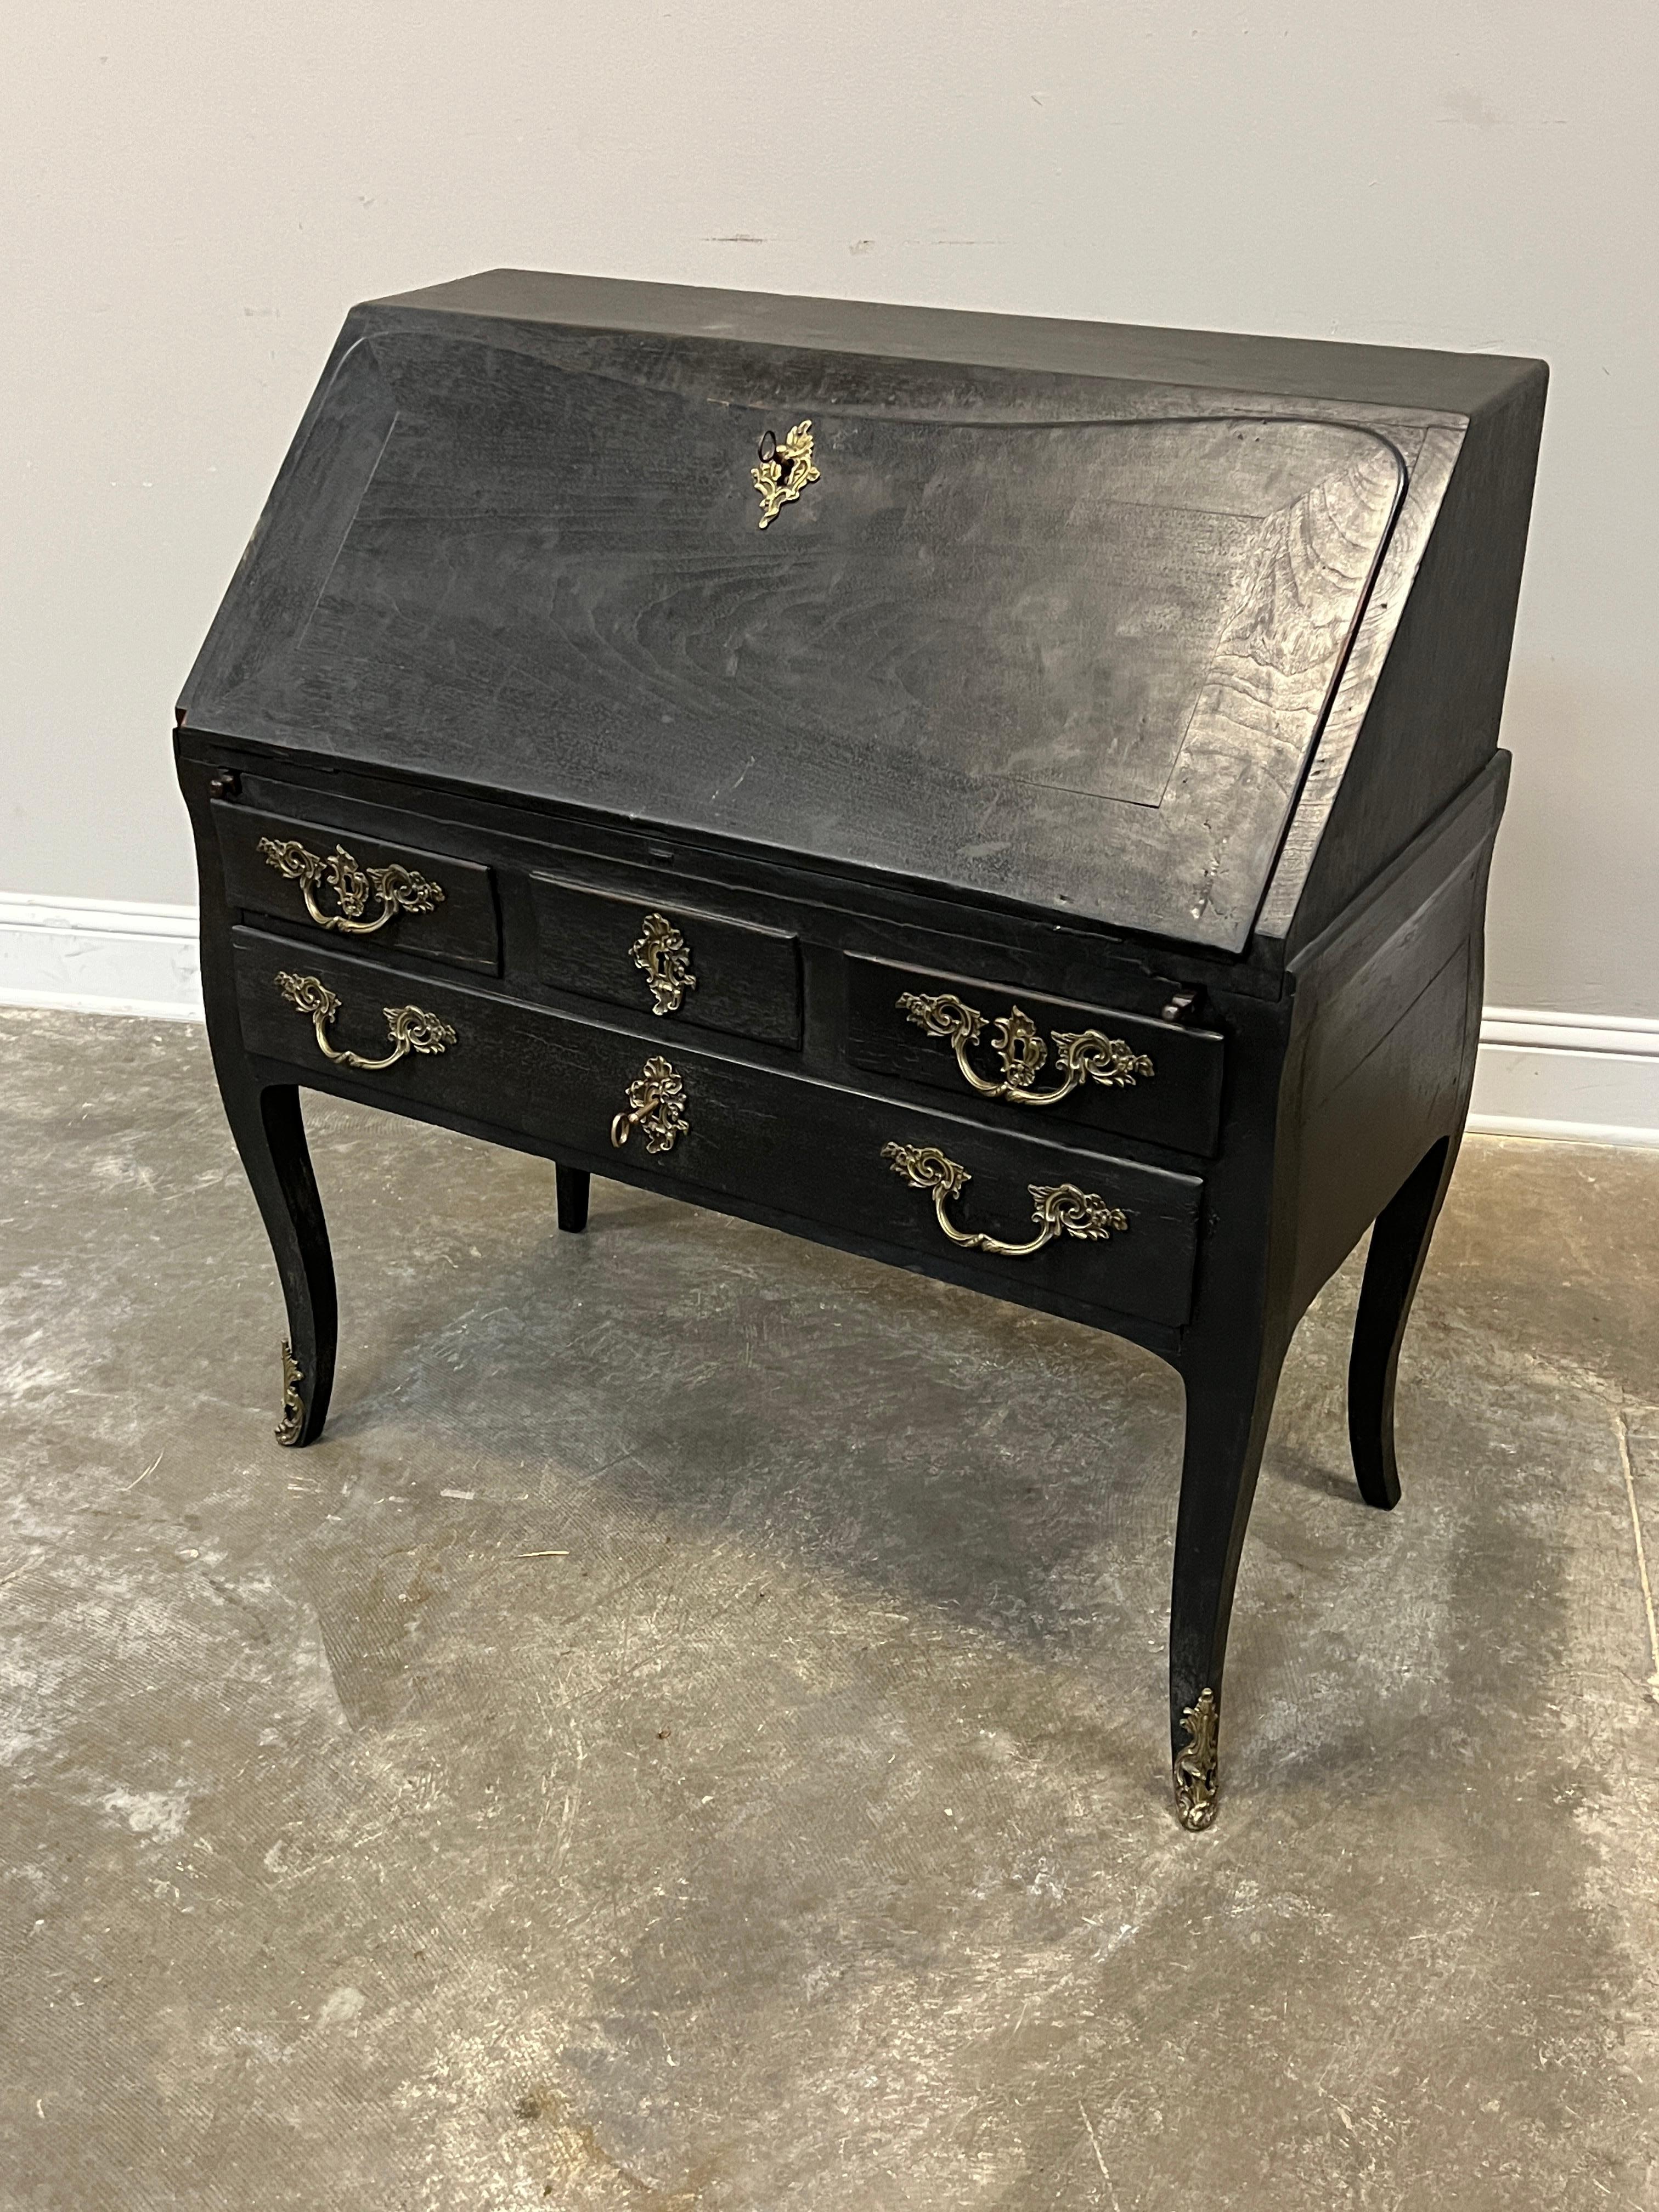 Lovely painted drop leaf or slant front desk made more charming with painted blue interior. Overpainting on the exterior in black. 

Louis XV style with Regence leanings, desk was hand made in early 19th C. French in oak with mortice and tenon and